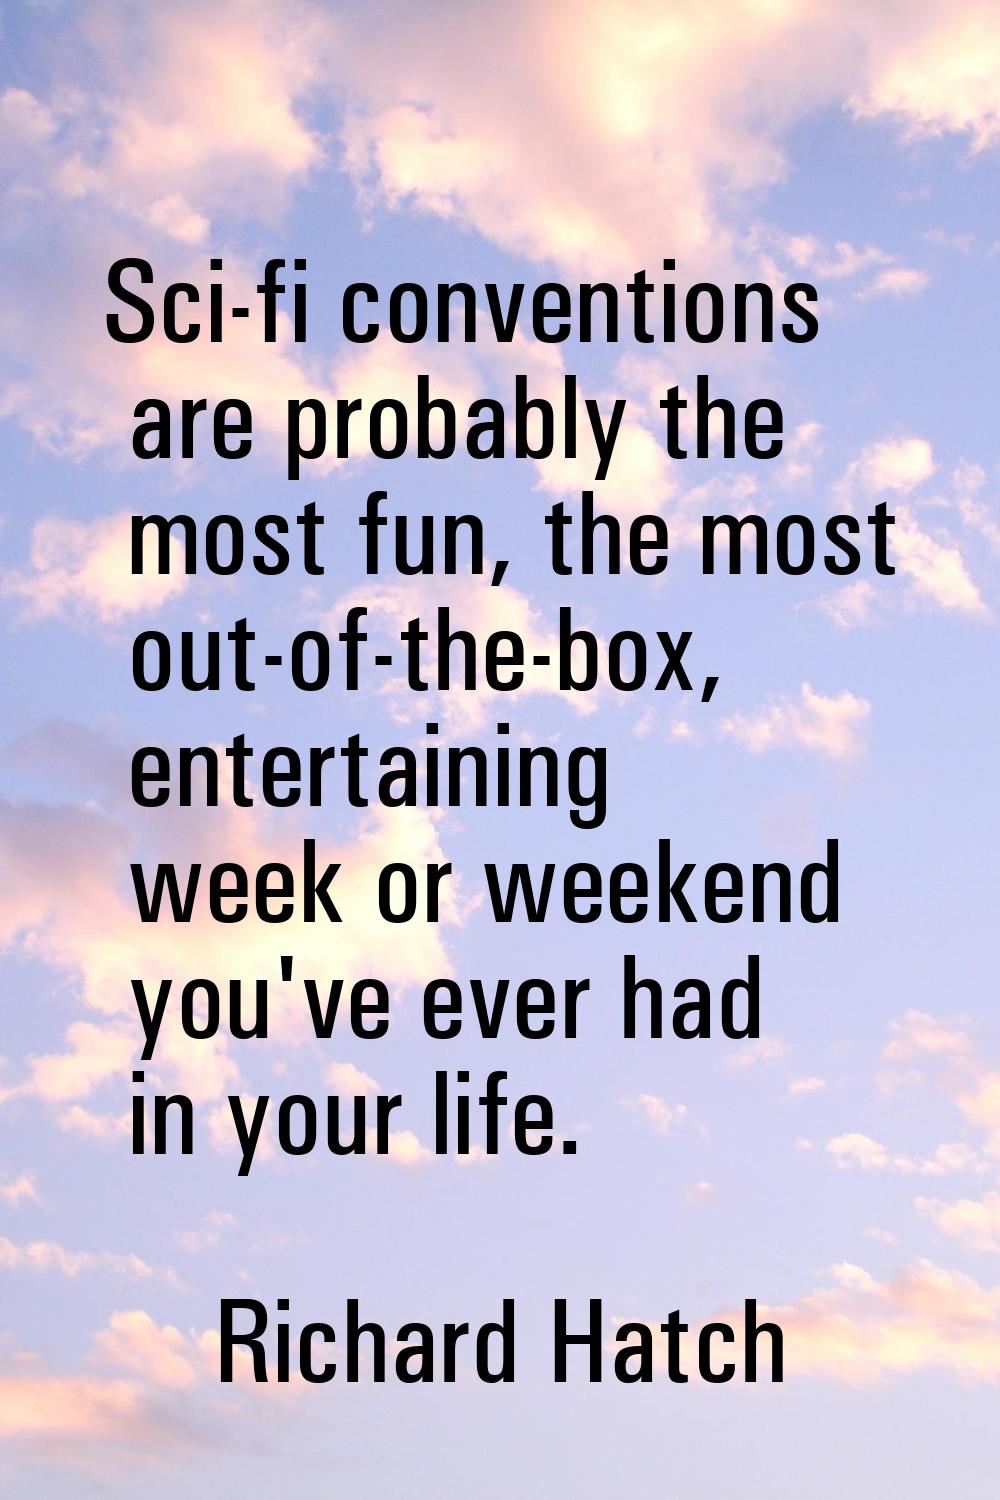 Sci-fi conventions are probably the most fun, the most out-of-the-box, entertaining week or weekend